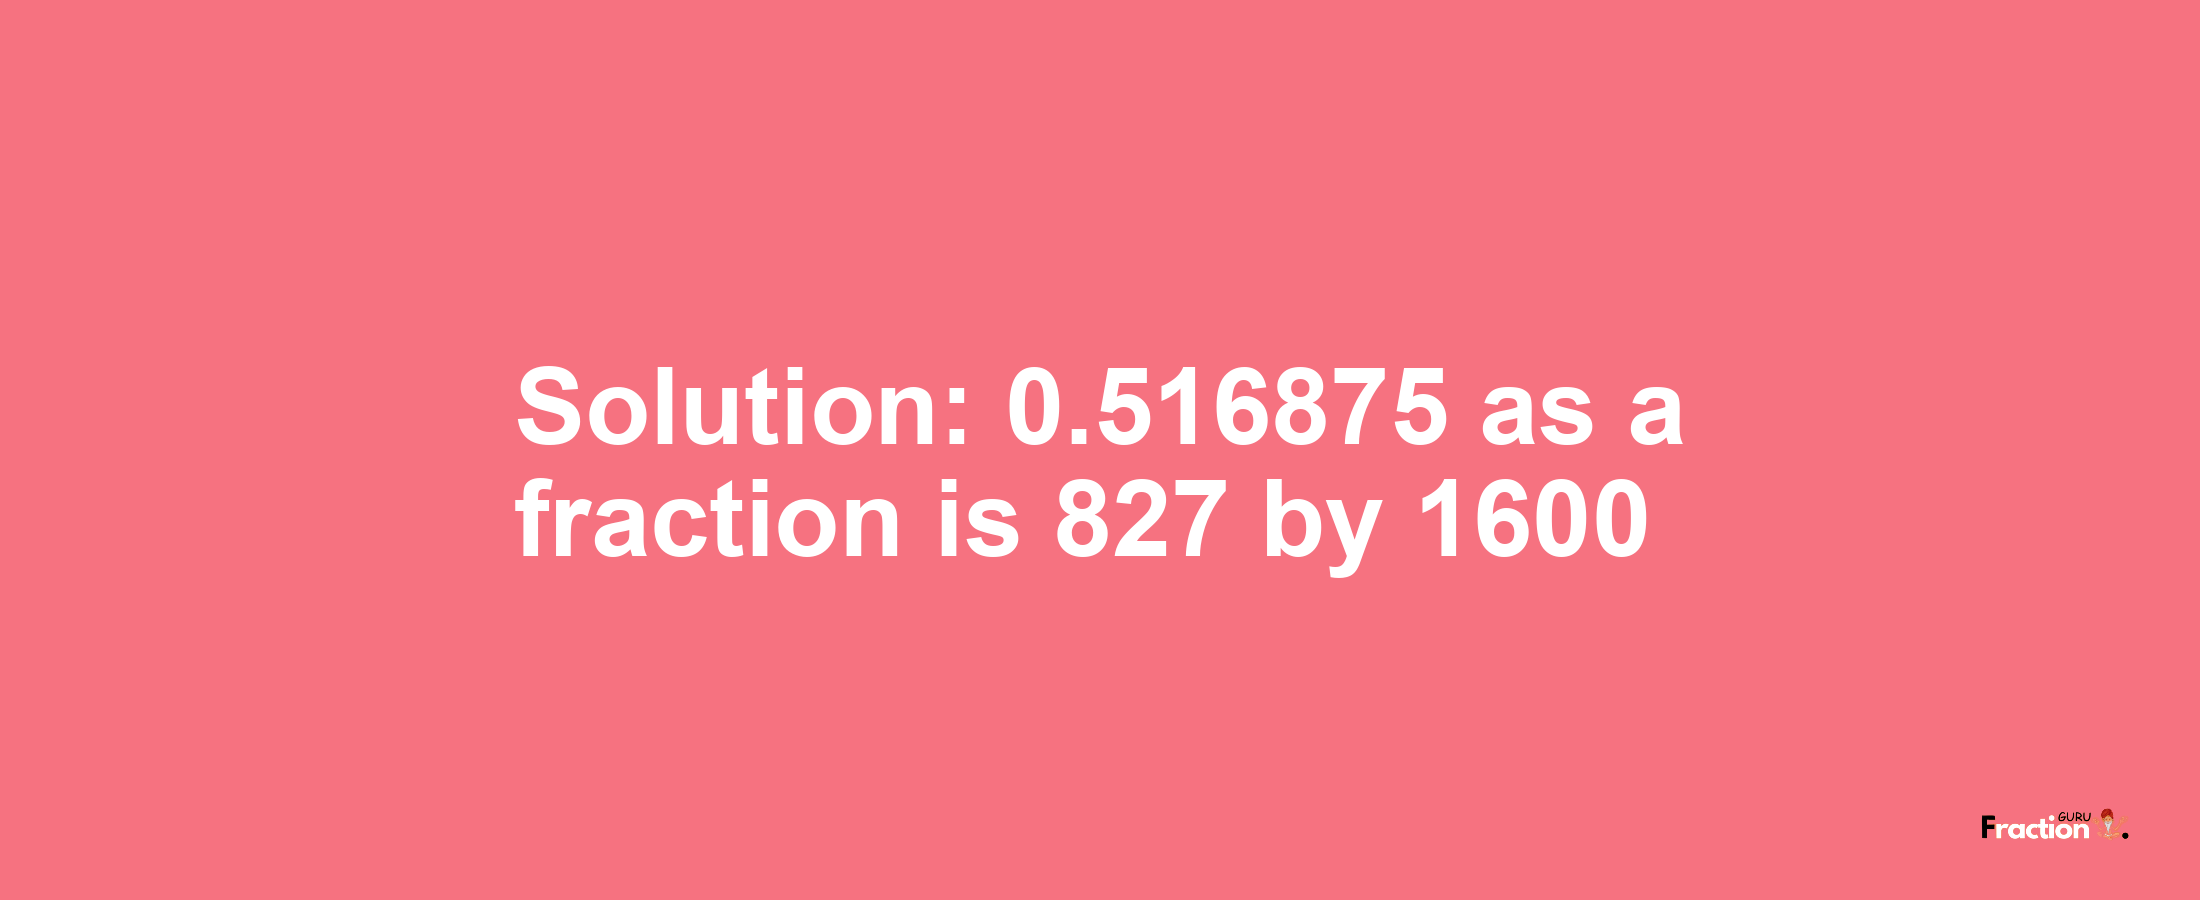 Solution:0.516875 as a fraction is 827/1600